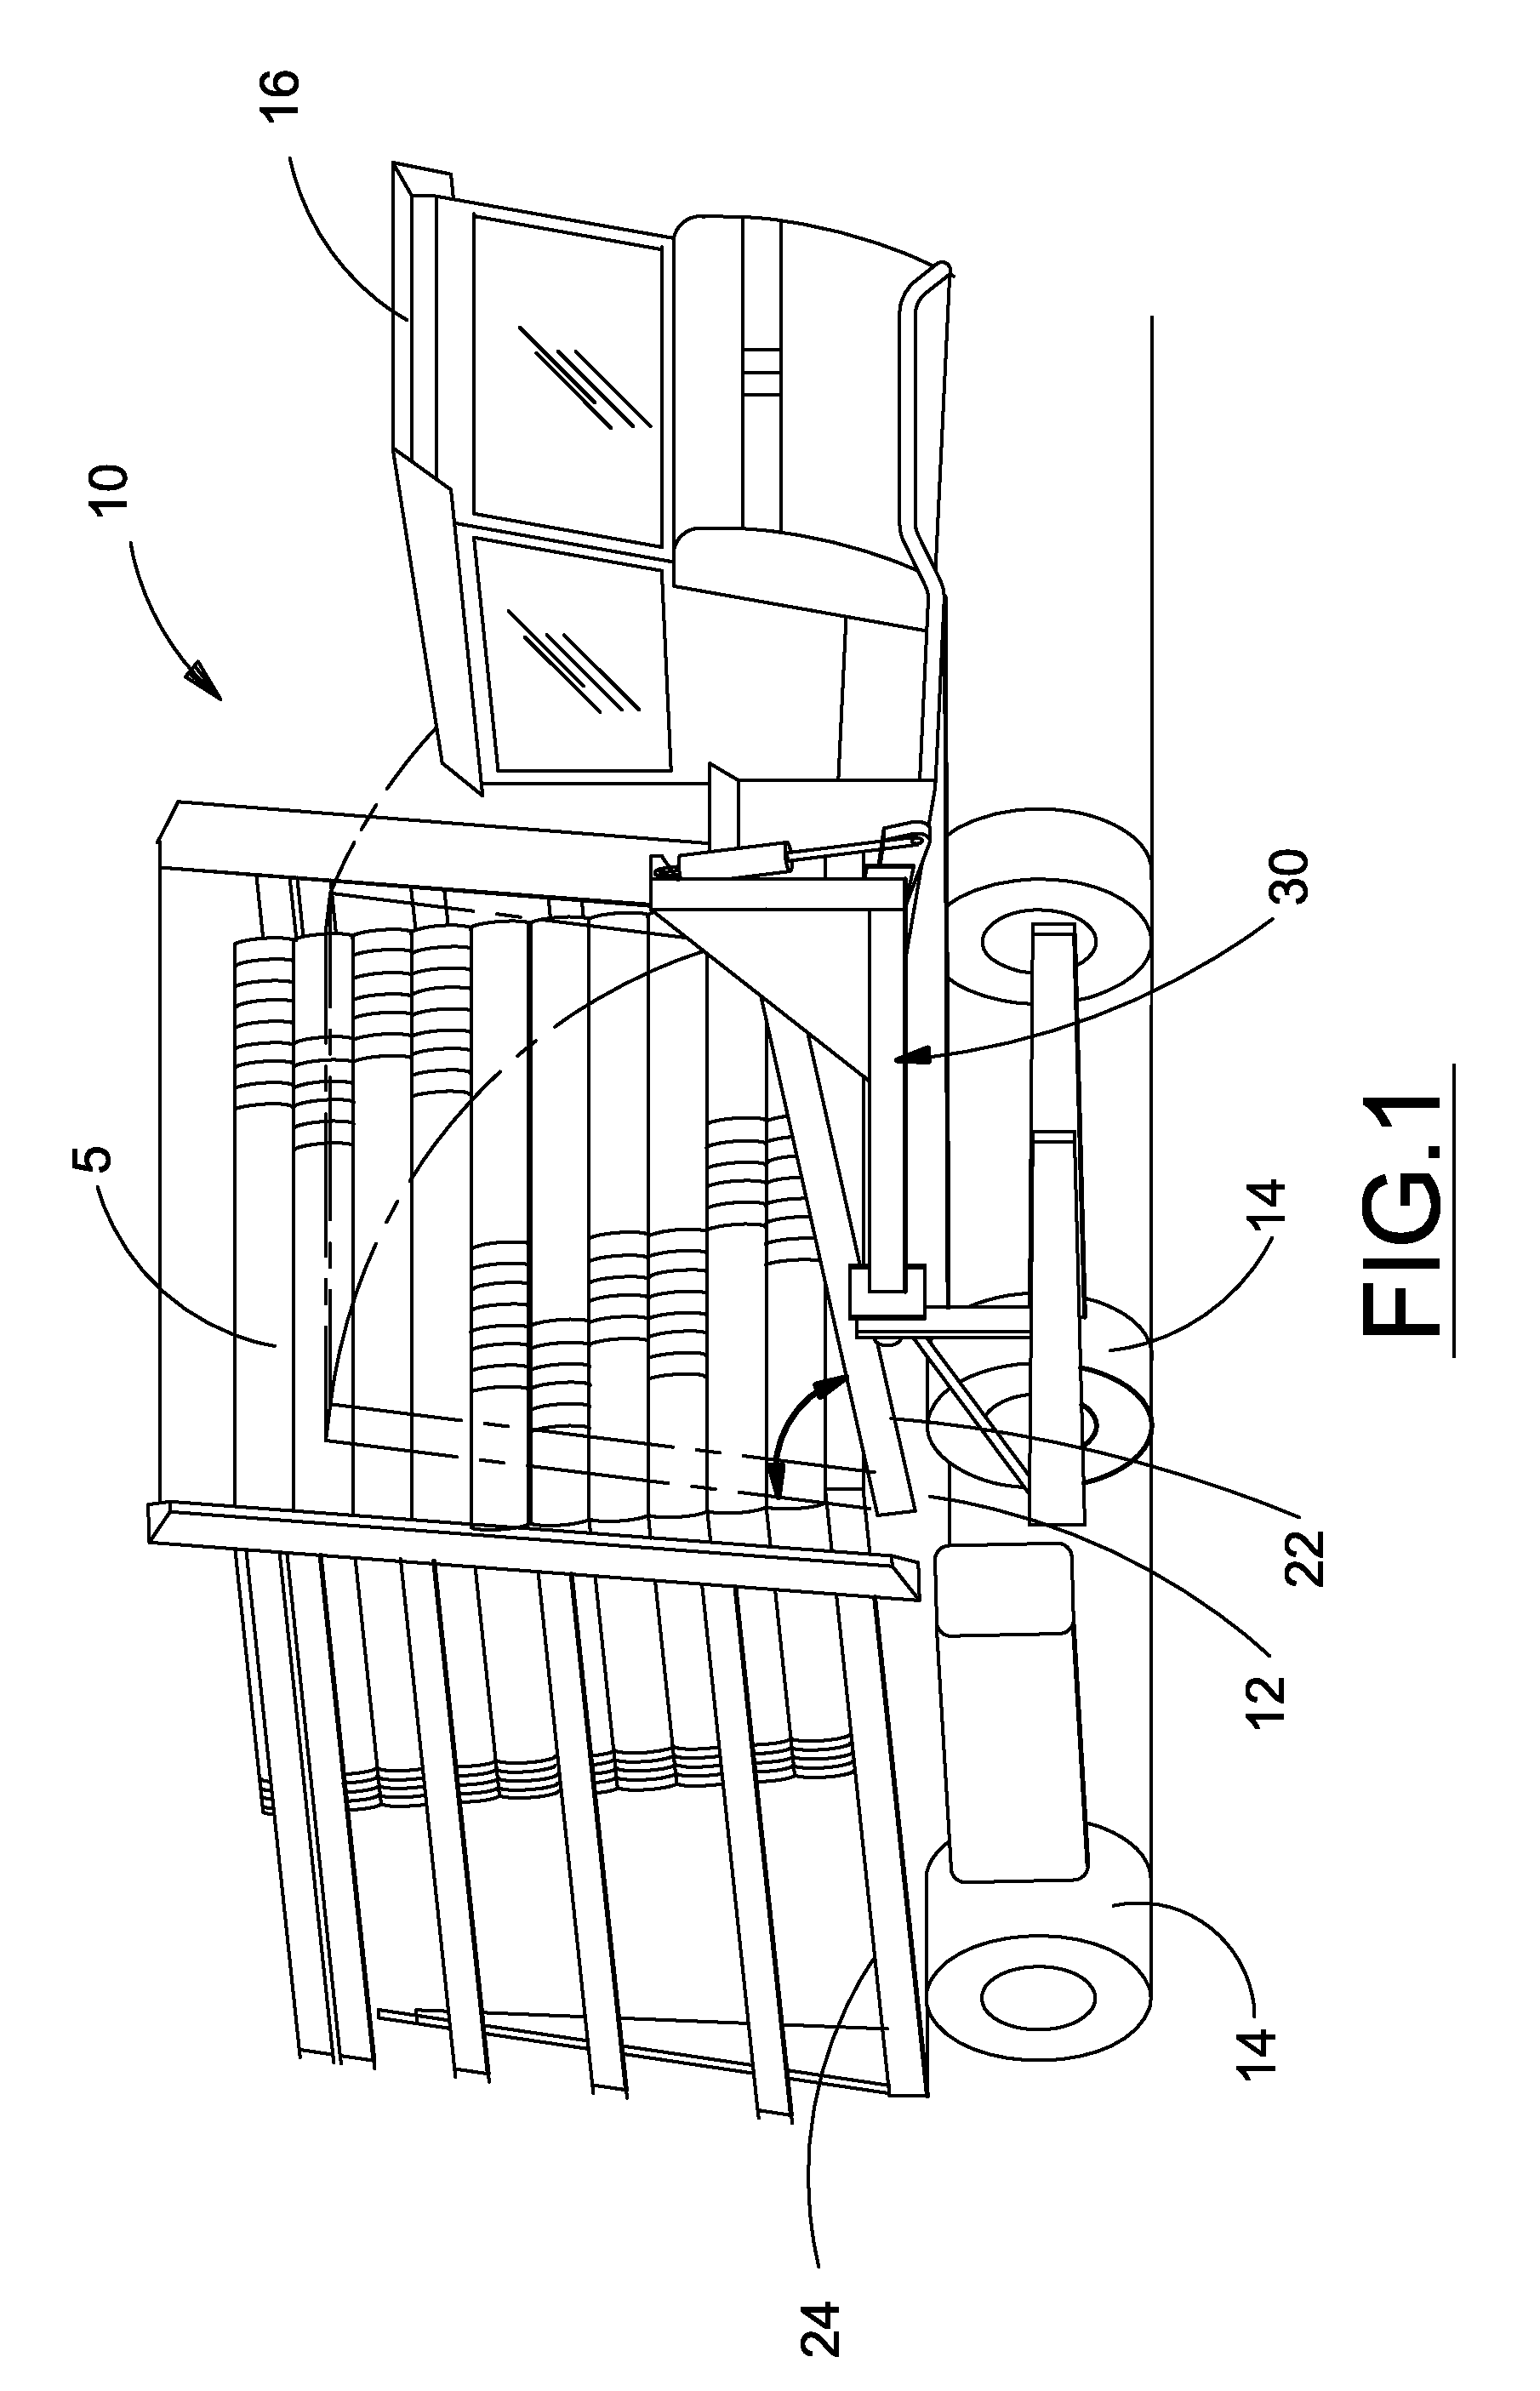 Automatic control of a large bale loading apparatus